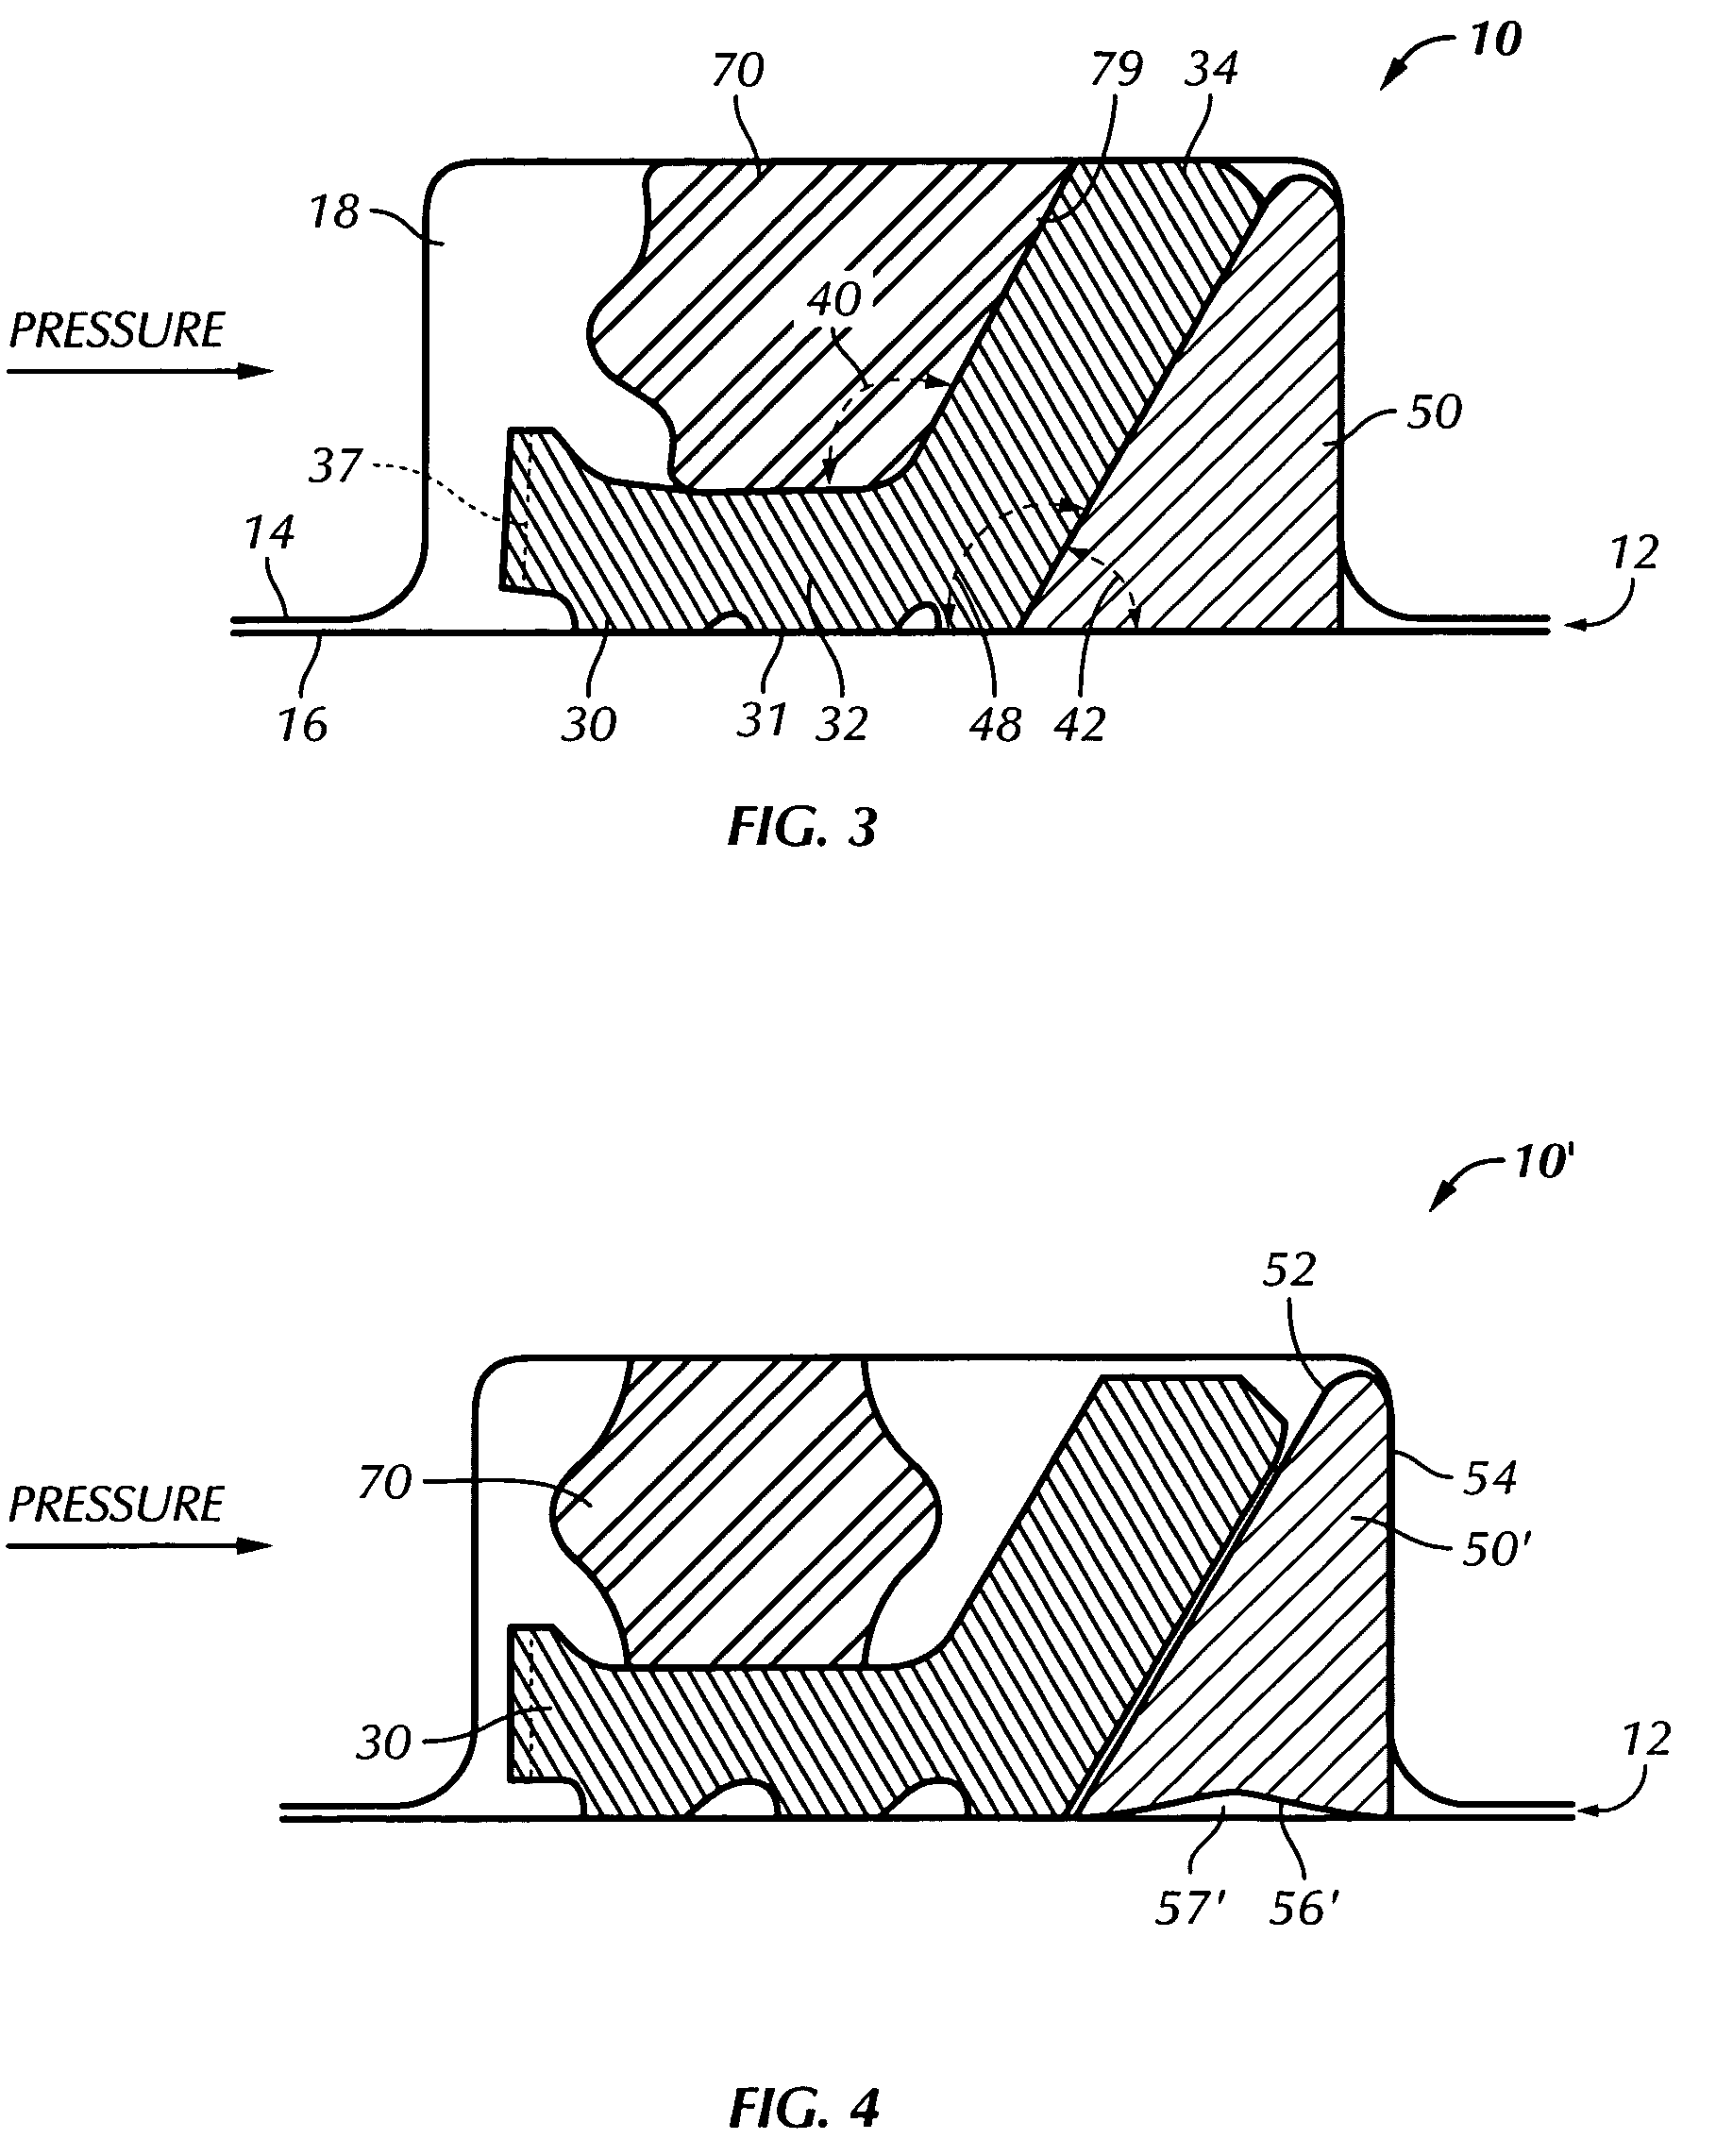 Cammed seal assembly with sealing ring having an angled leg portion and foot portion with elastomeric energizer element